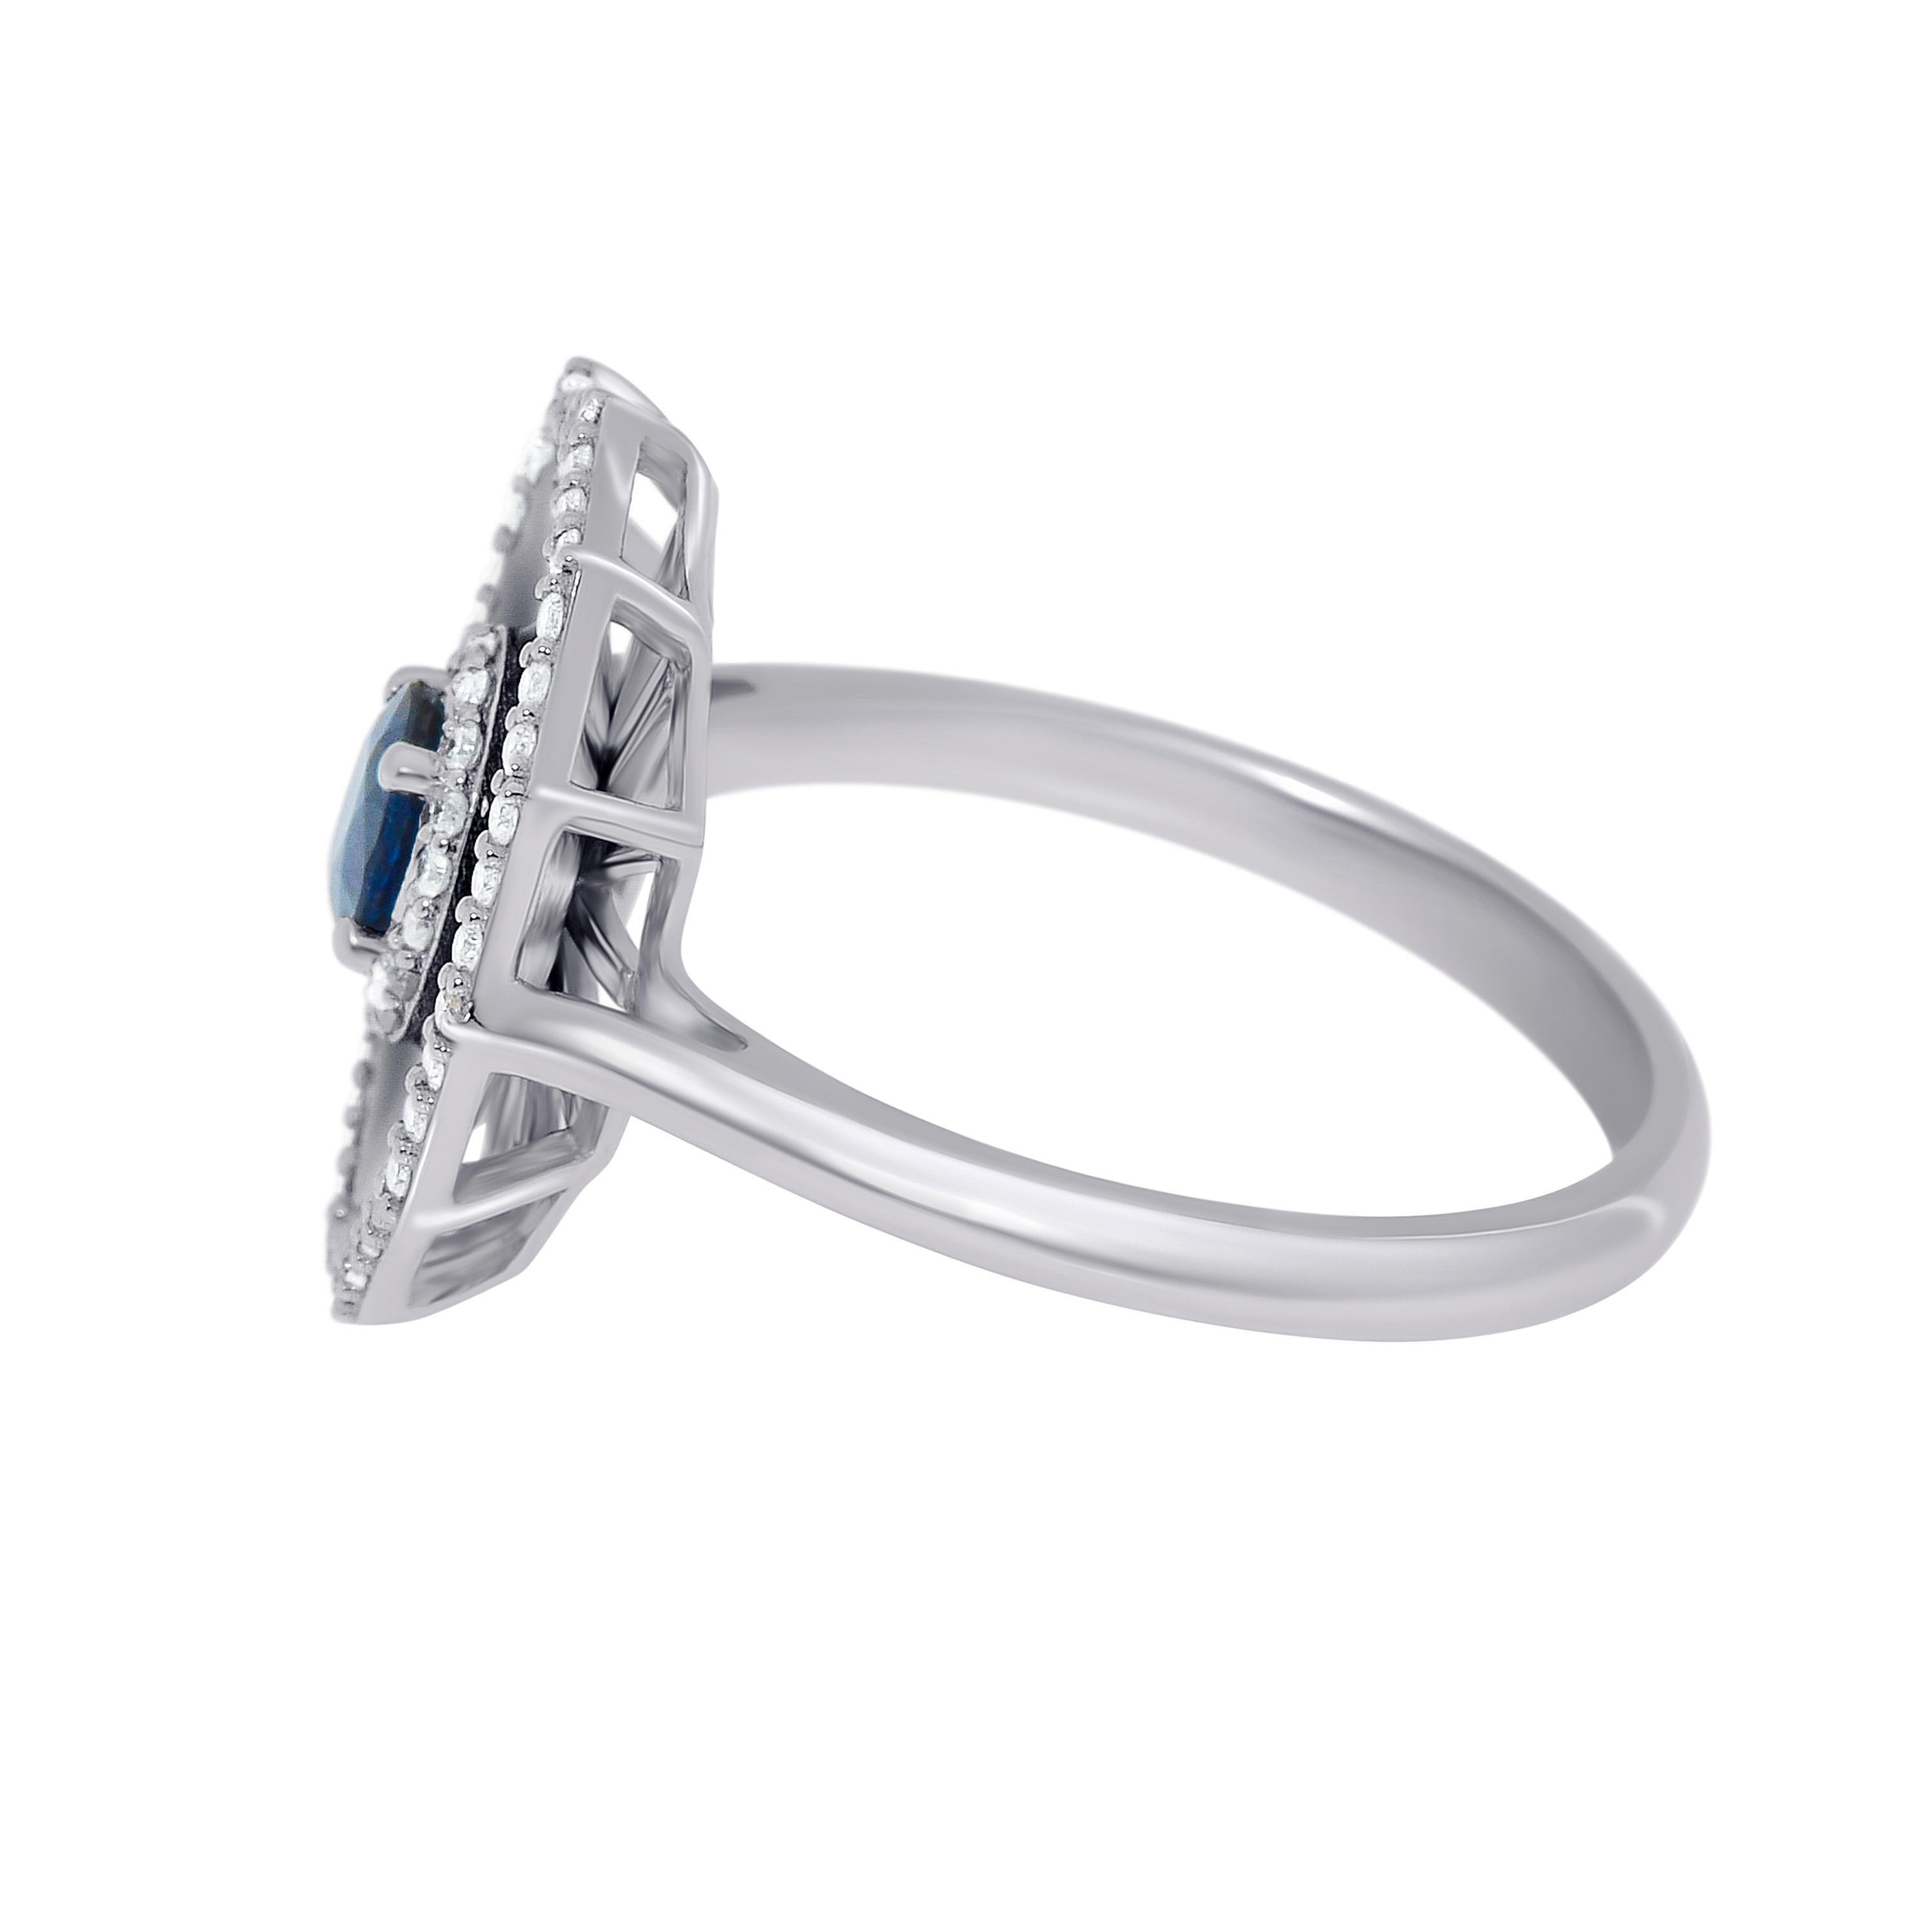 Contemporary Zydo 18K White Gold and Enamel, Sapphires & Diamonds Cocktail Ring sz. 7 For Sale